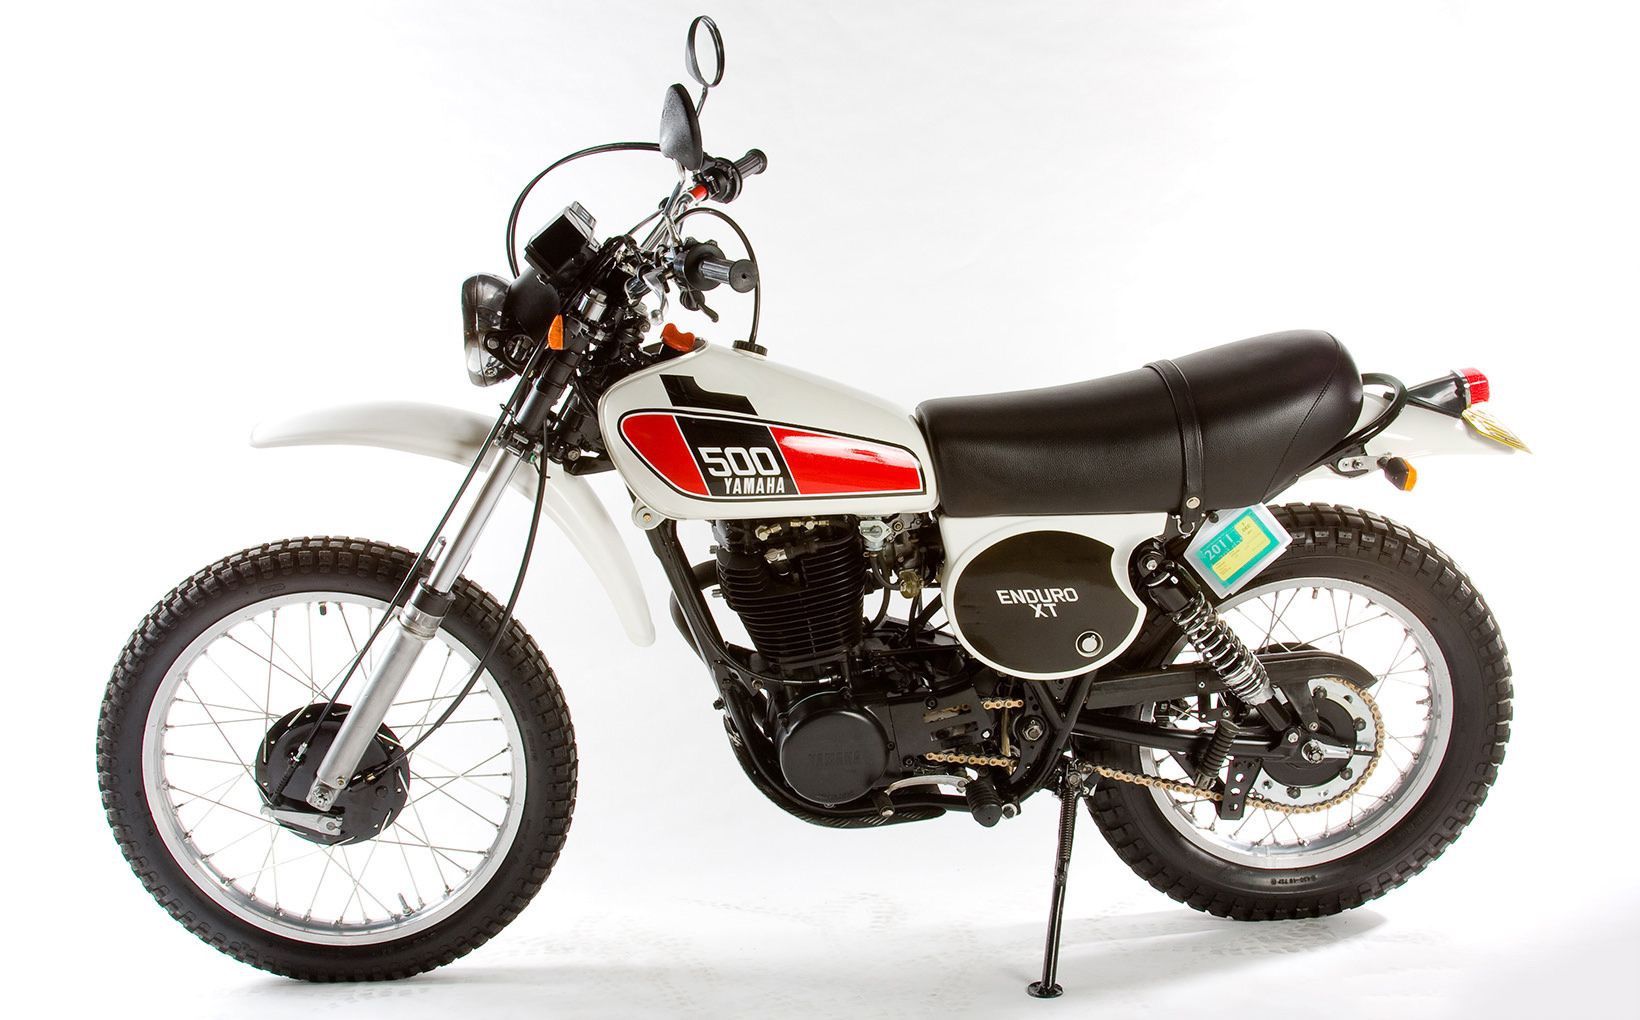 An XT500 Yamaha motorcycle from the late 1970s